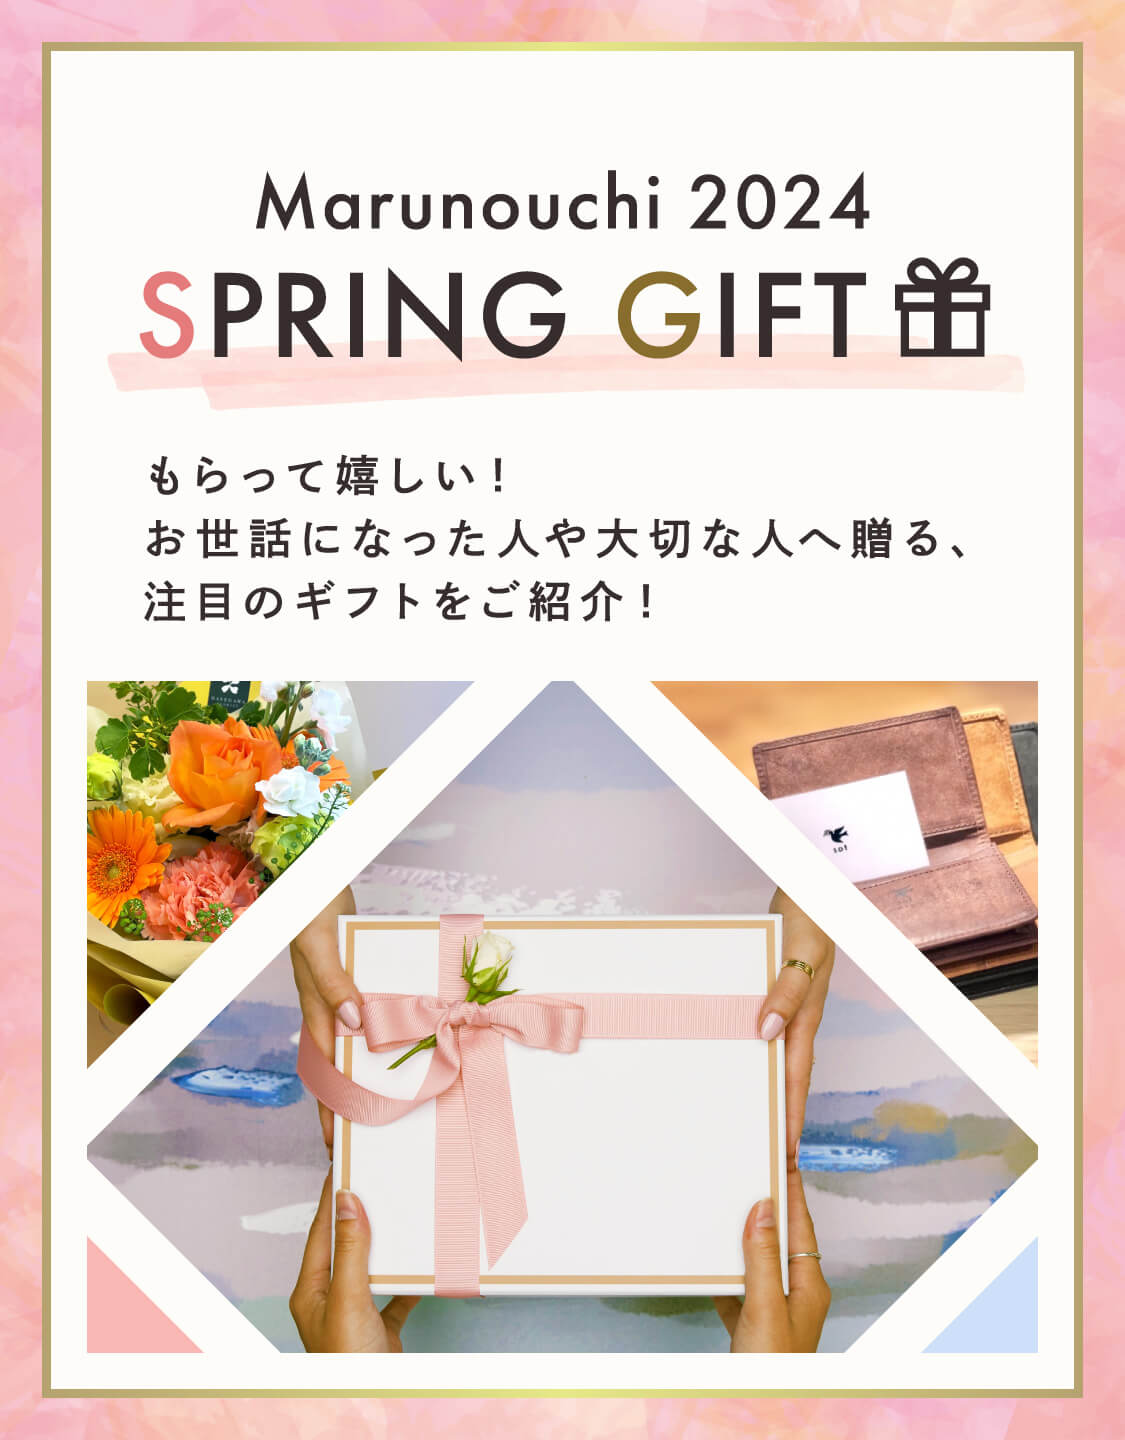 I'm happy to receive Marunouchi 2024 SPRING GIFT! Introducing popular gifts to give to loved ones and loved ones!